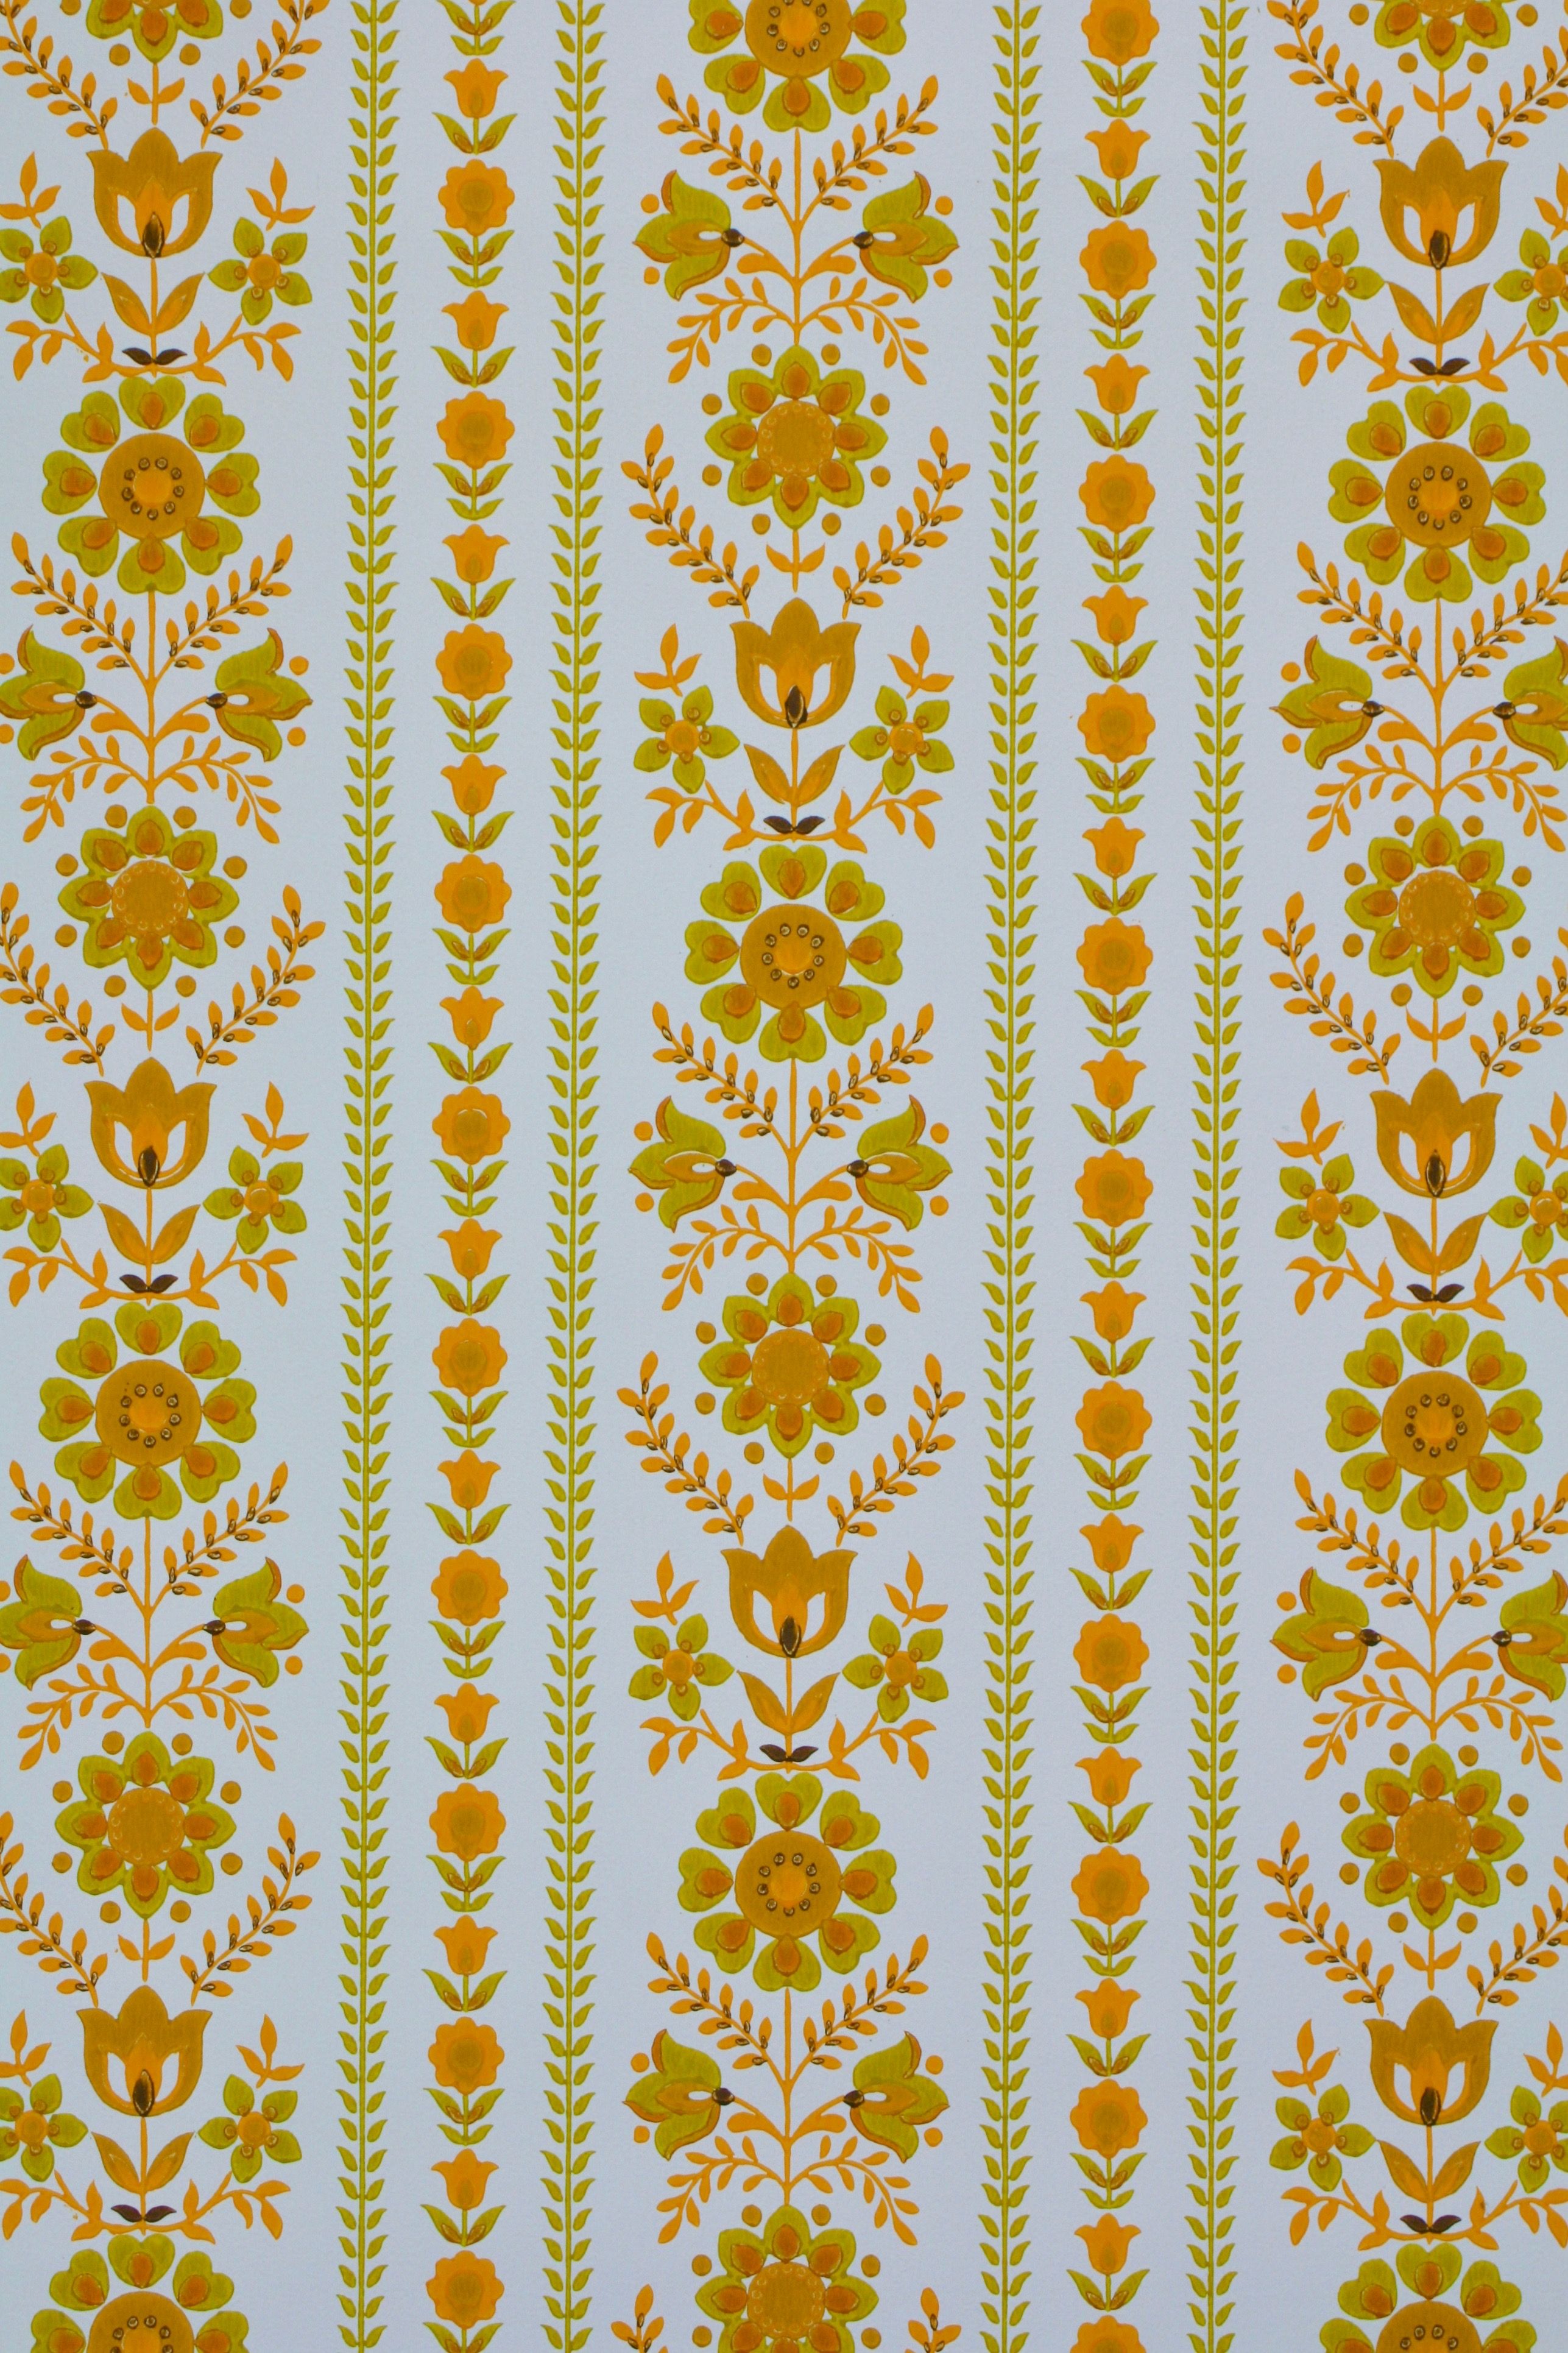 60s Wallpaper Free 60s Background